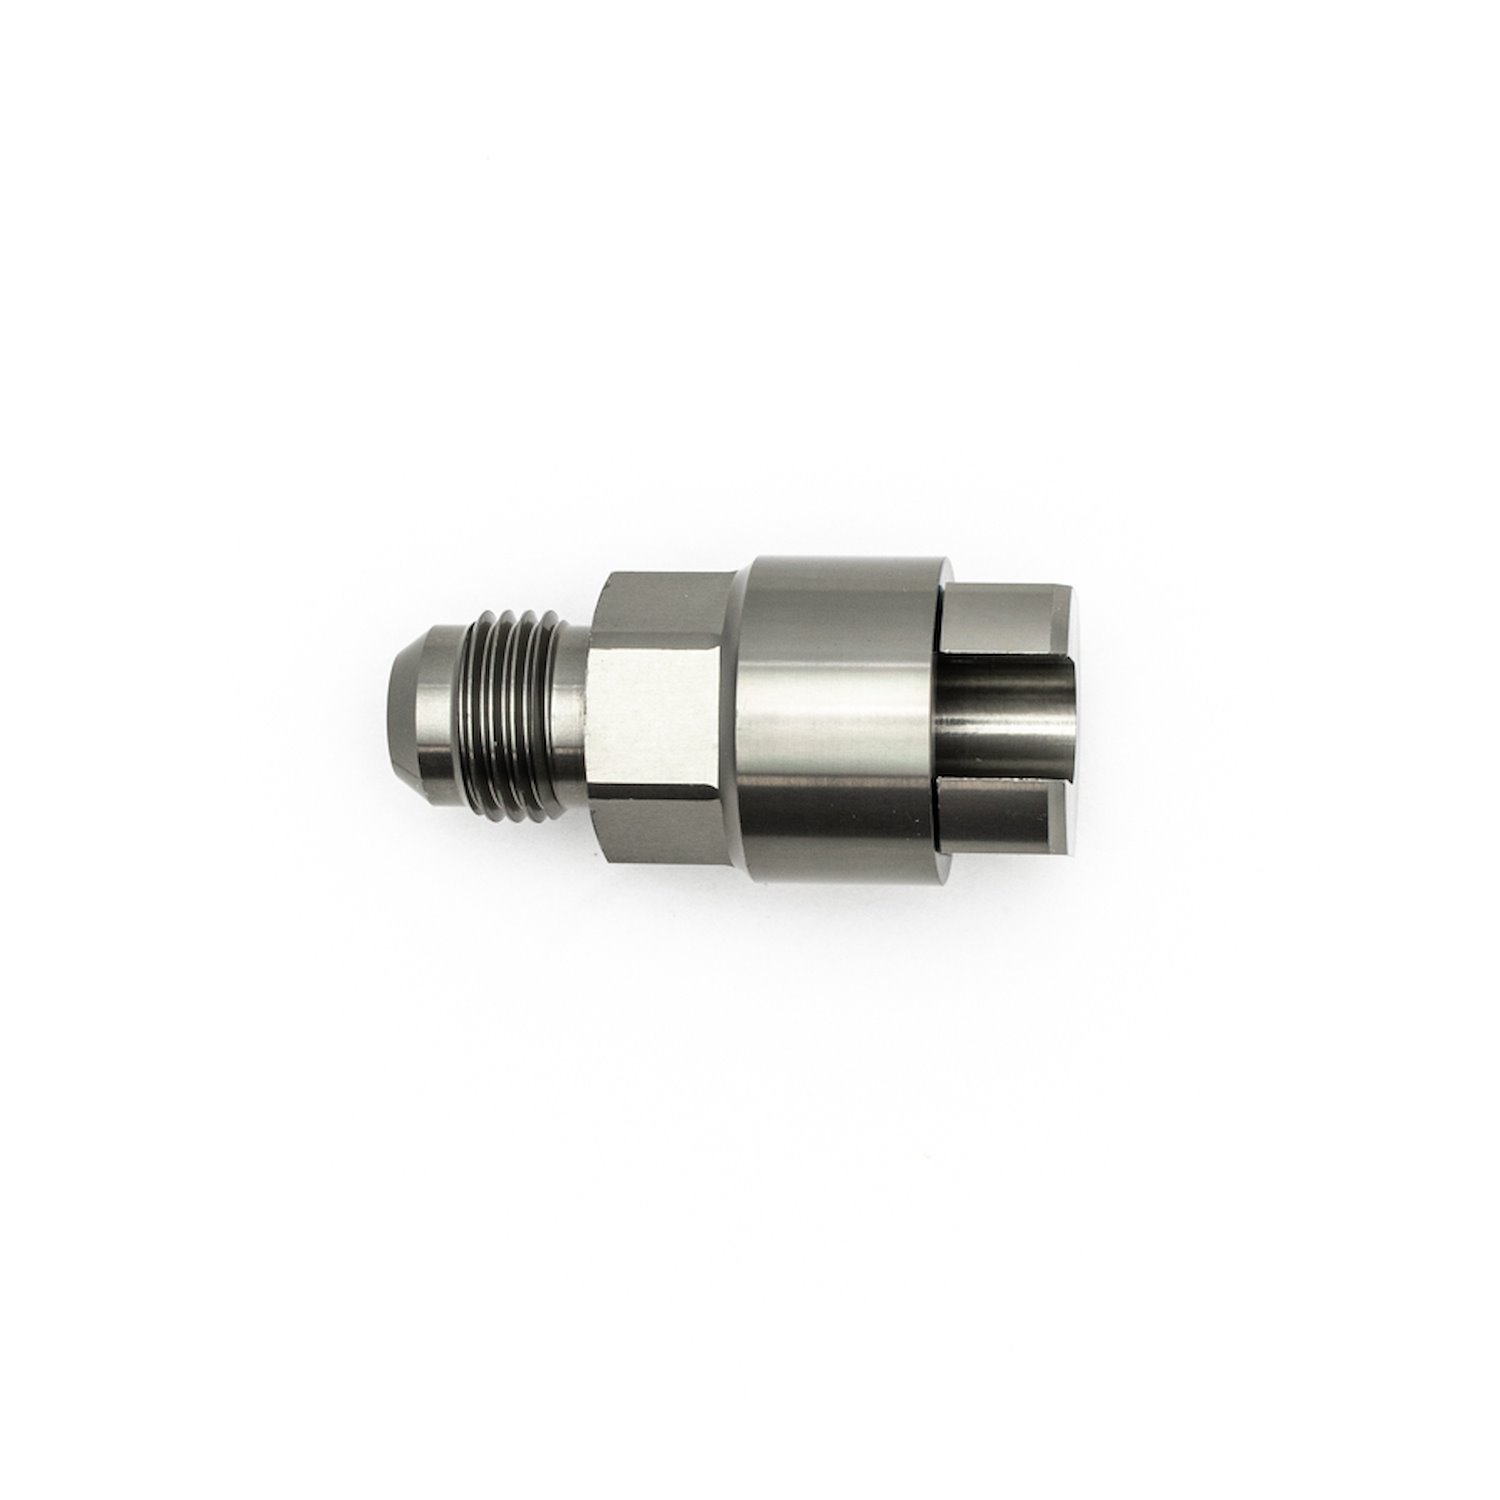 6020121 6AN Male Flare to 5/16 Inch Female EFI Quick Connect Adapter Anodized DW Titanium